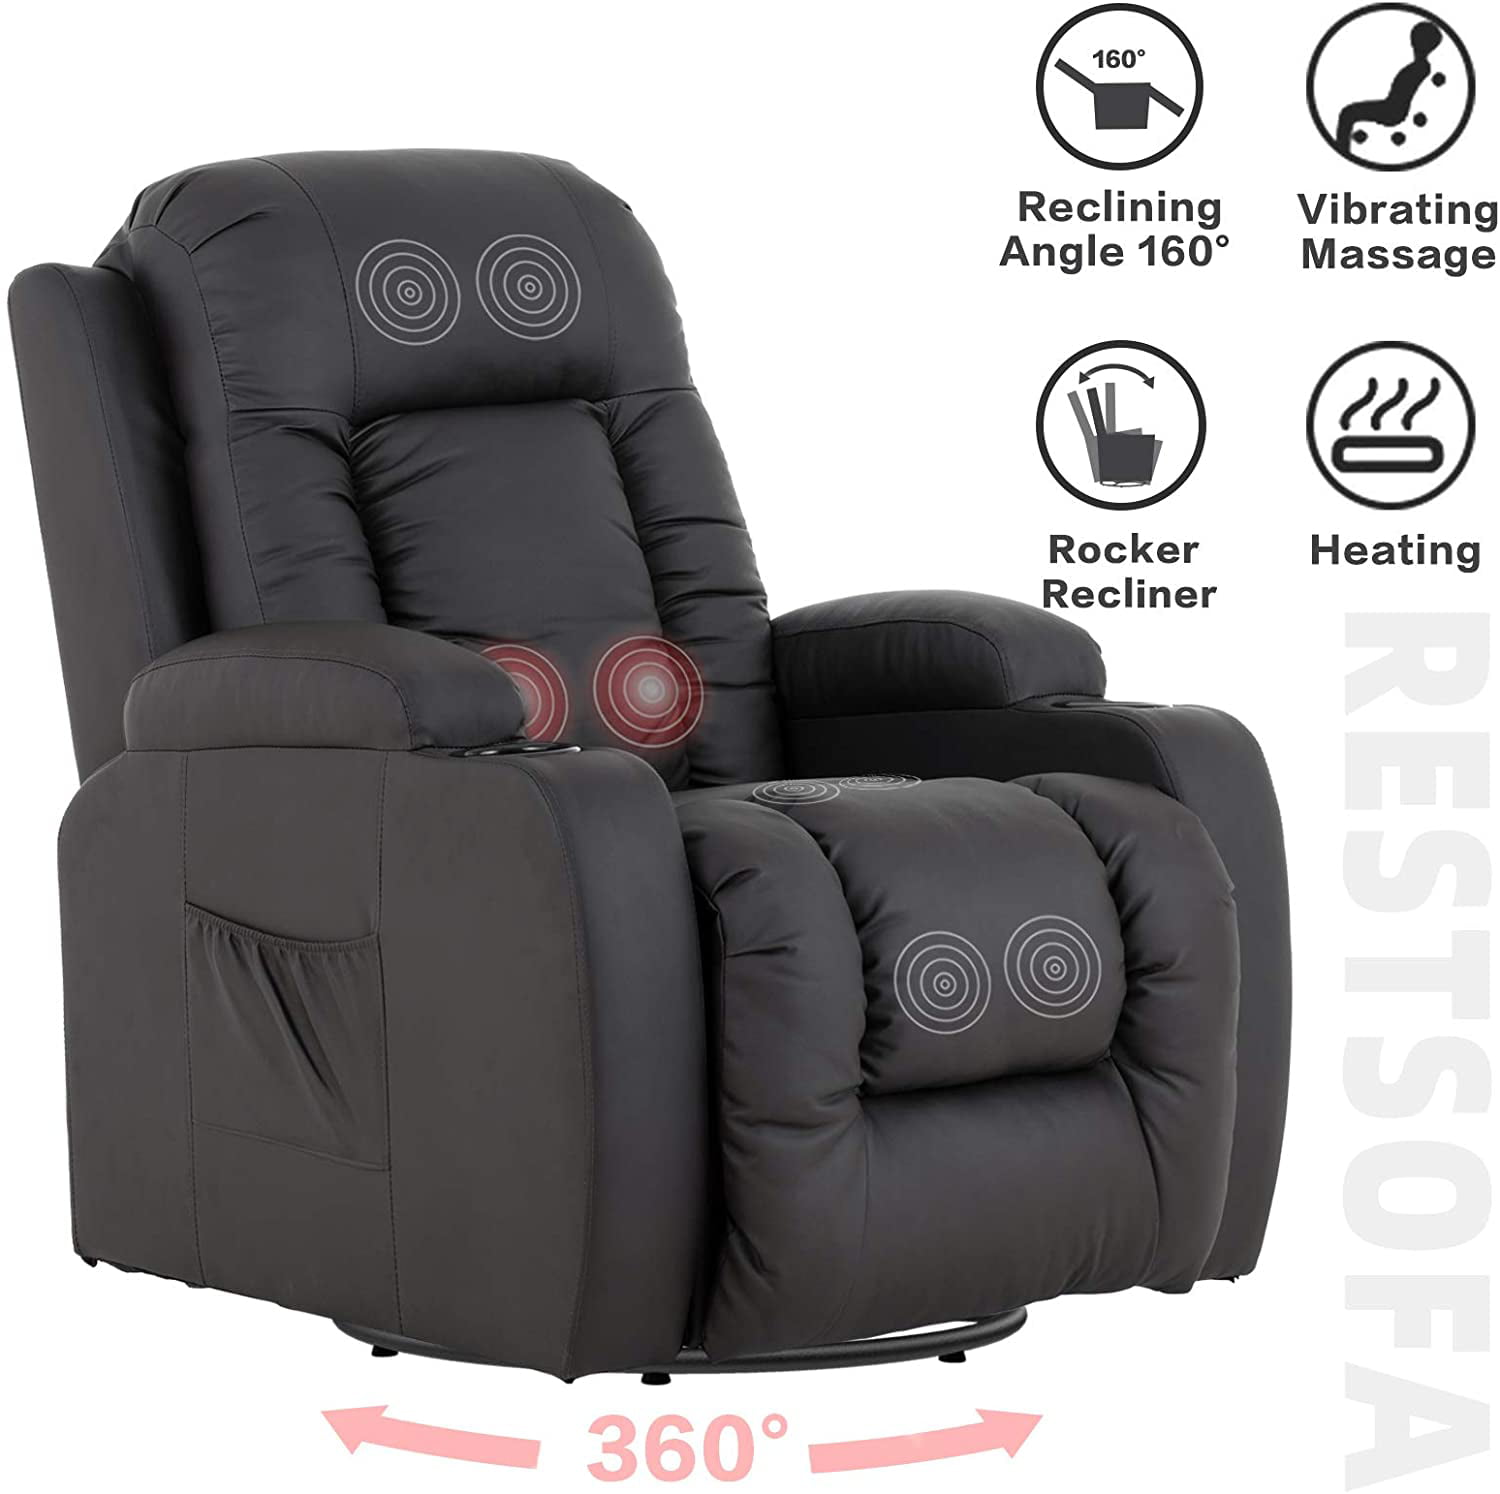 Mecor Massage Recliner Chair Pu Leather, Black Leather Massage Chair